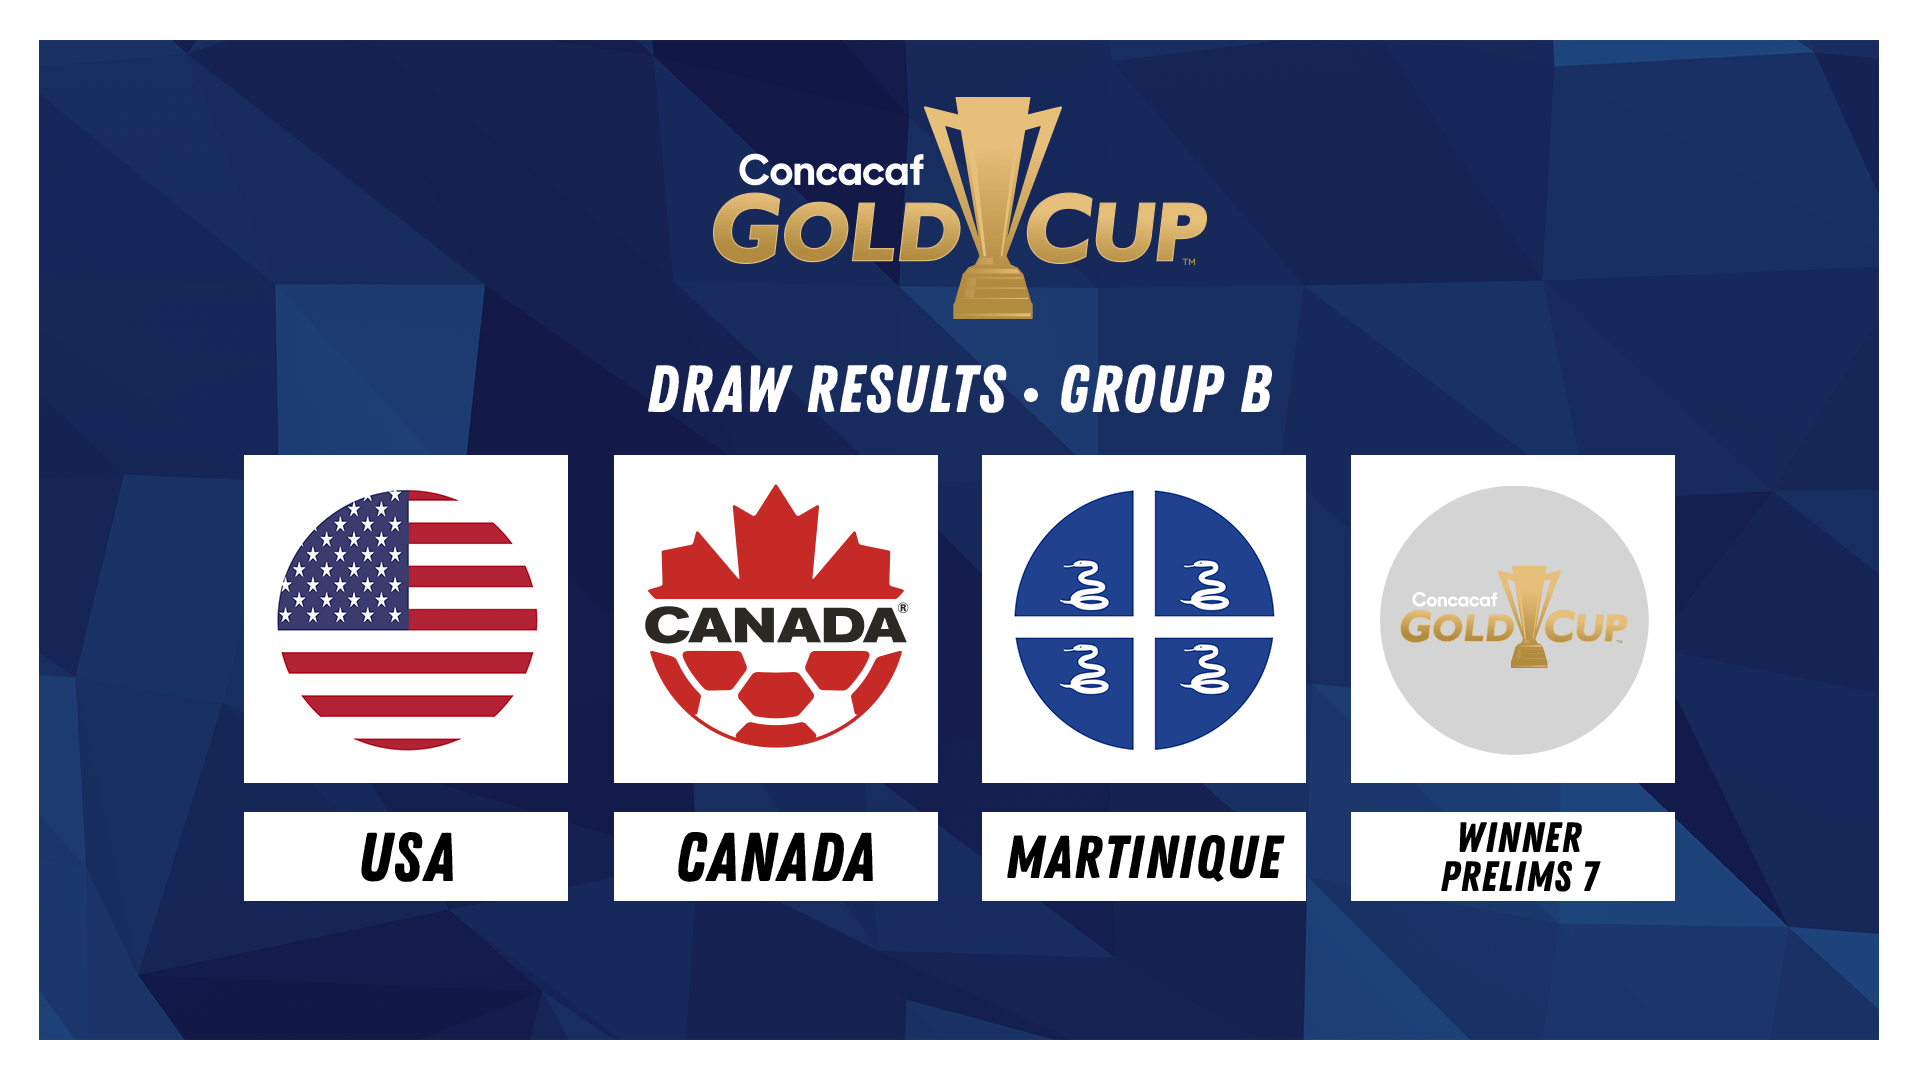 Concacaf gold cup 2021